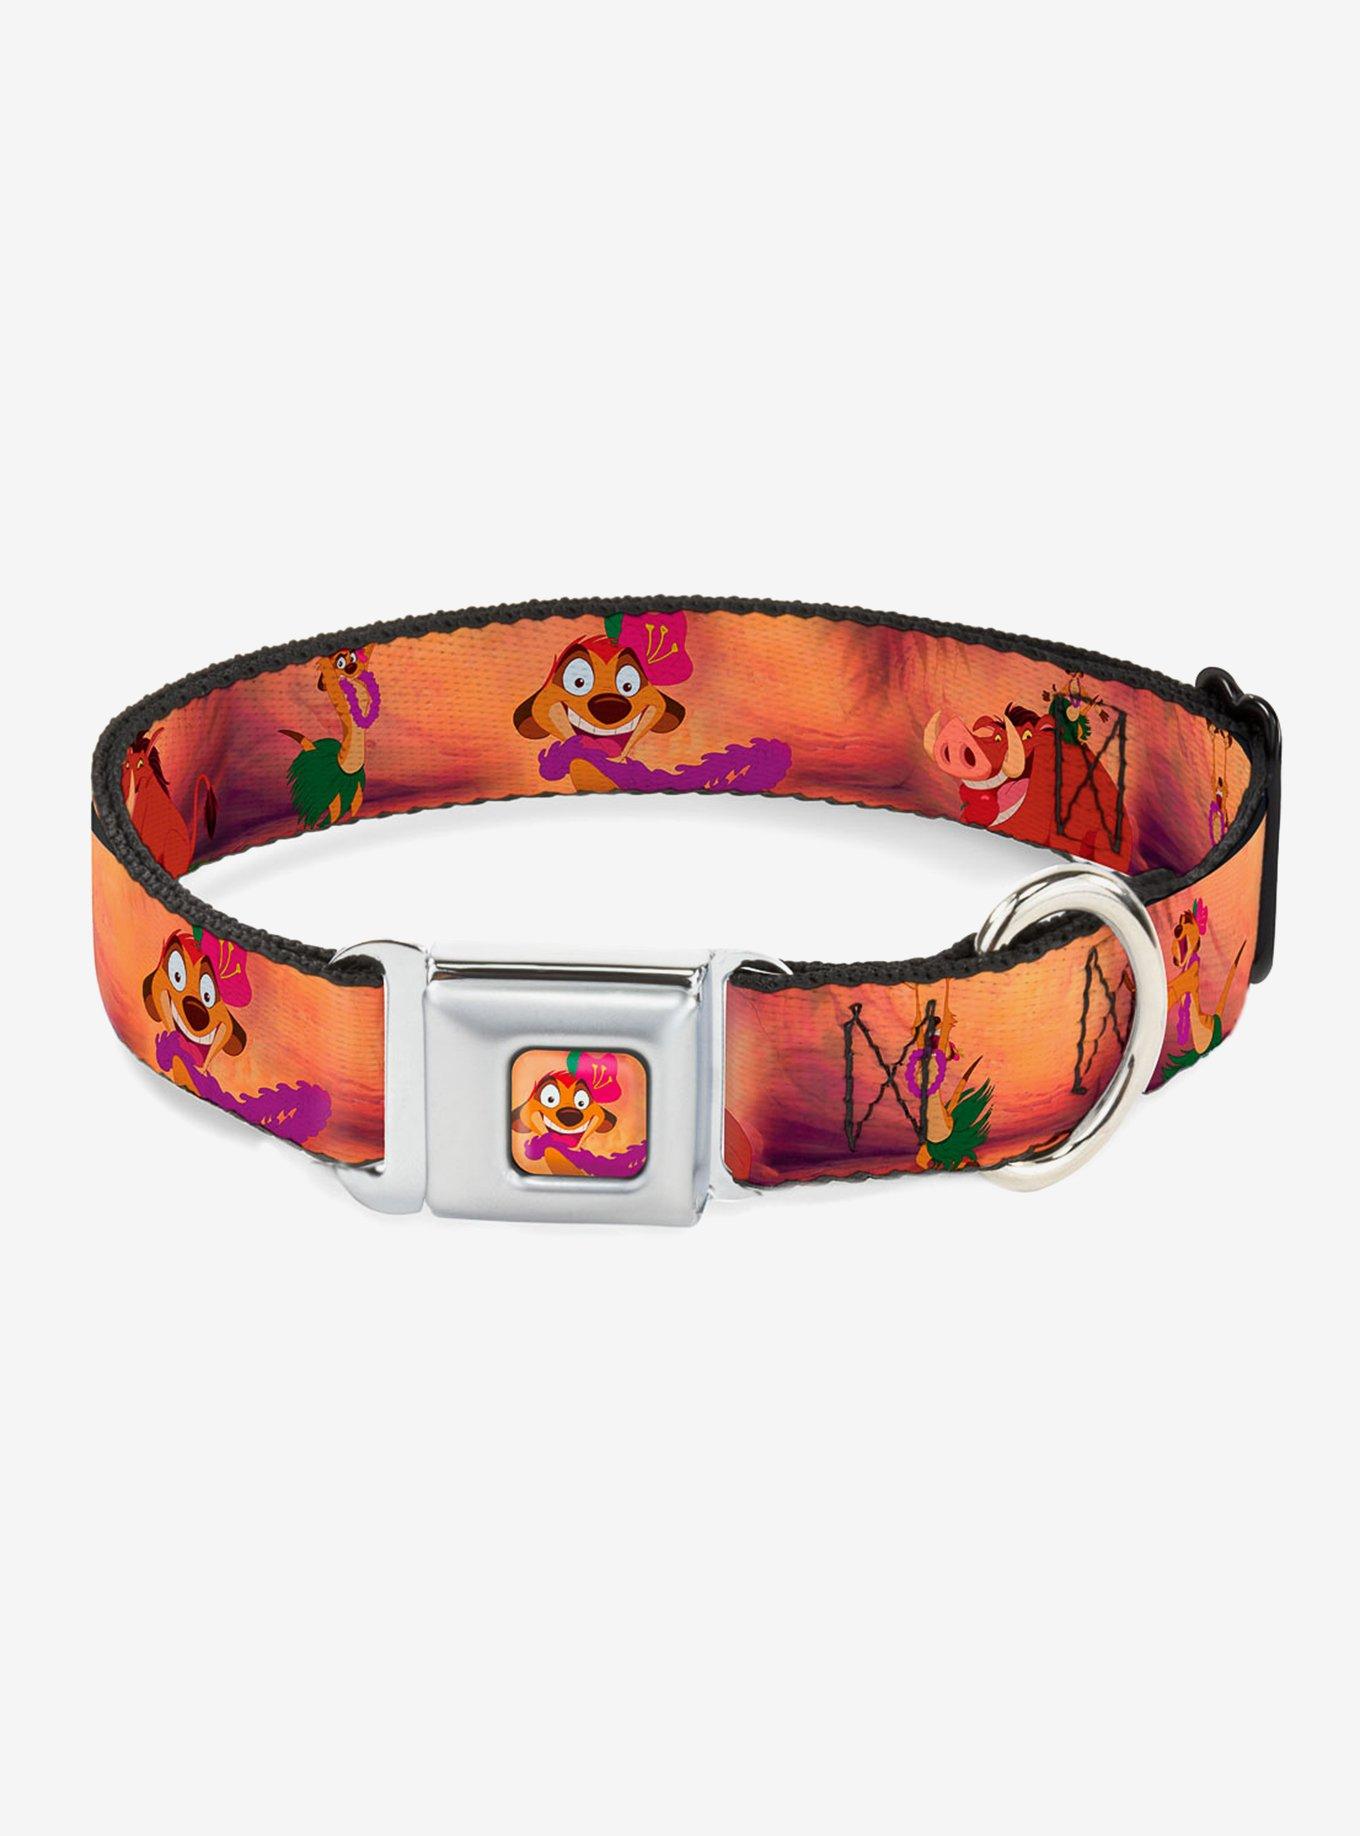 Disney The Lion King Timon Pumba The Hula Song Poses Seatbelt Buckle Dog Collar, MULTICOLOR, hi-res